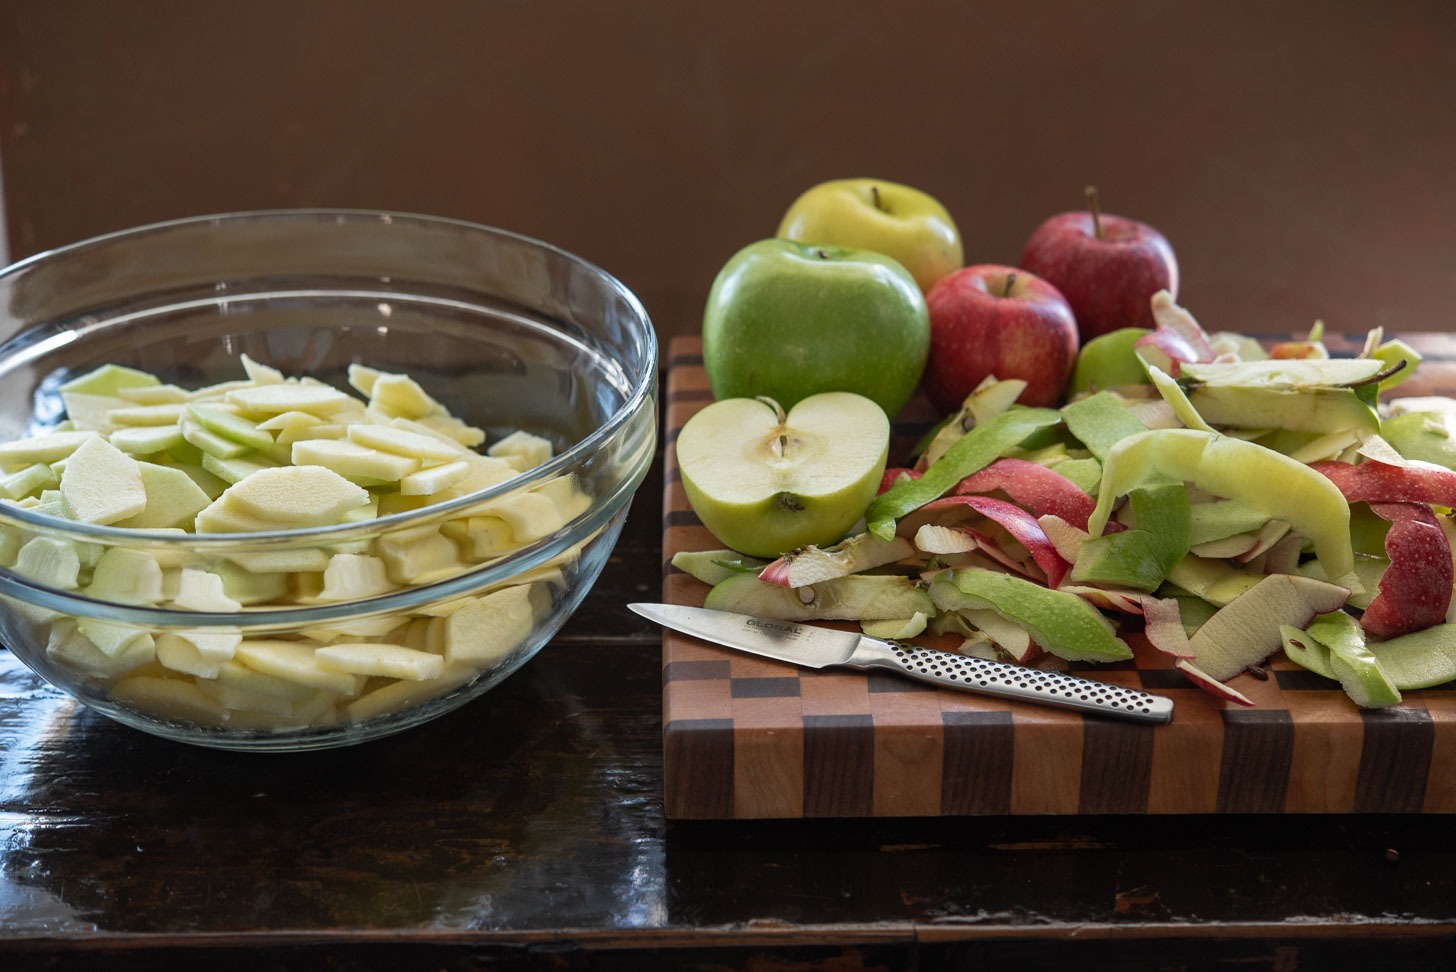 Various baking apples are peeled and sliced into small pieces.